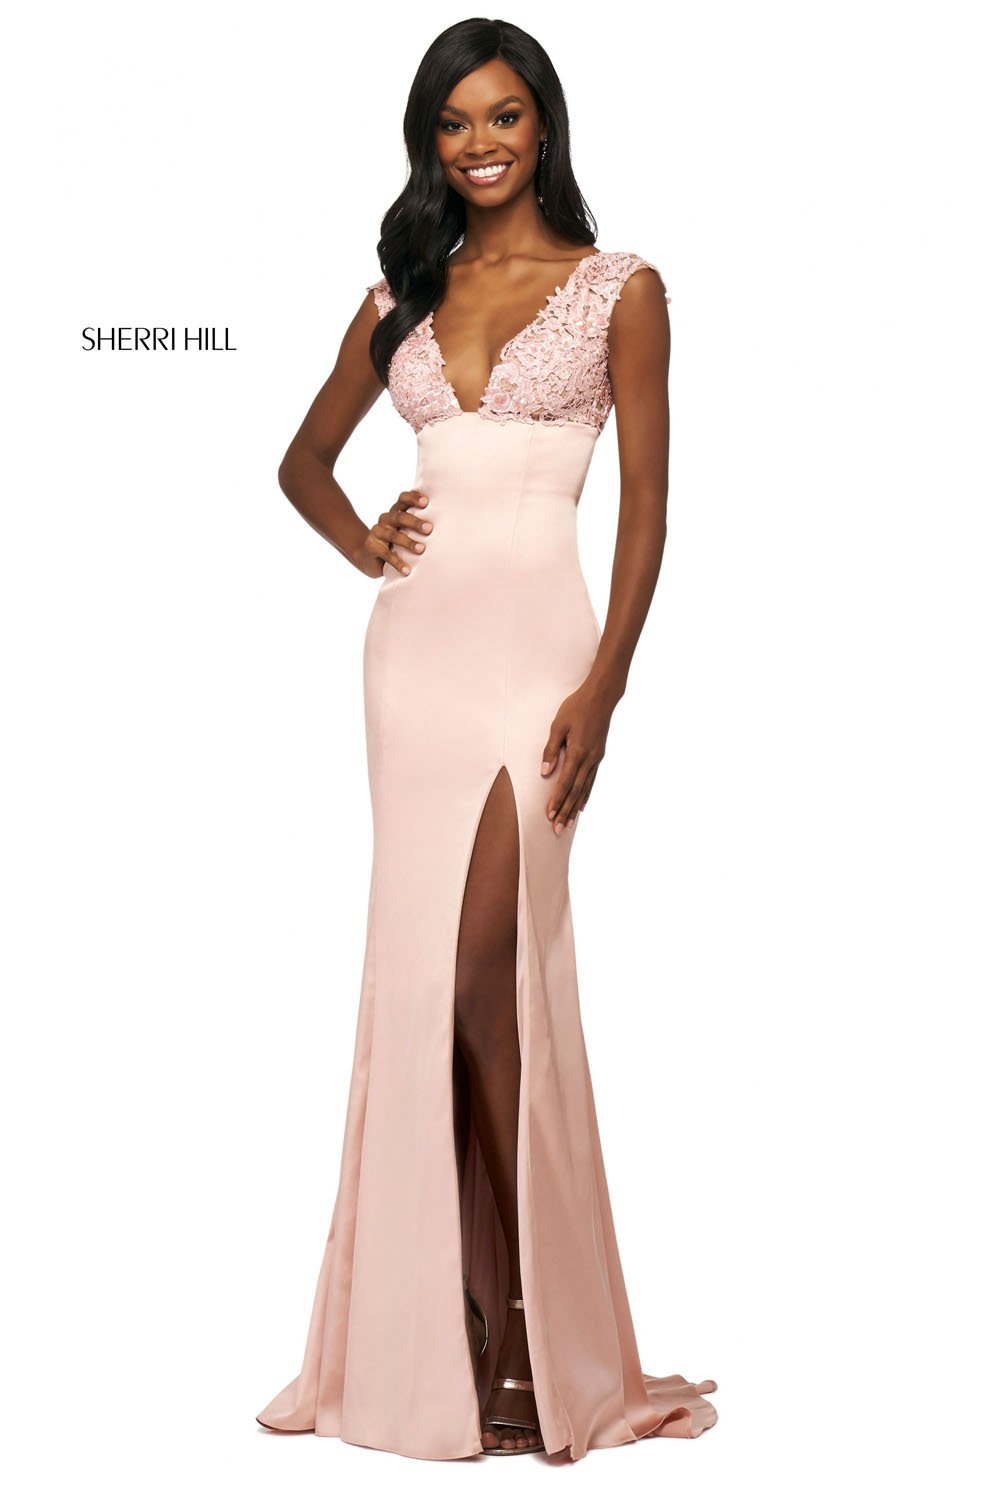 Sherri Hill 53735 dress images in these colors: Royal, Black, Red, Navy, Blush, Ruby.